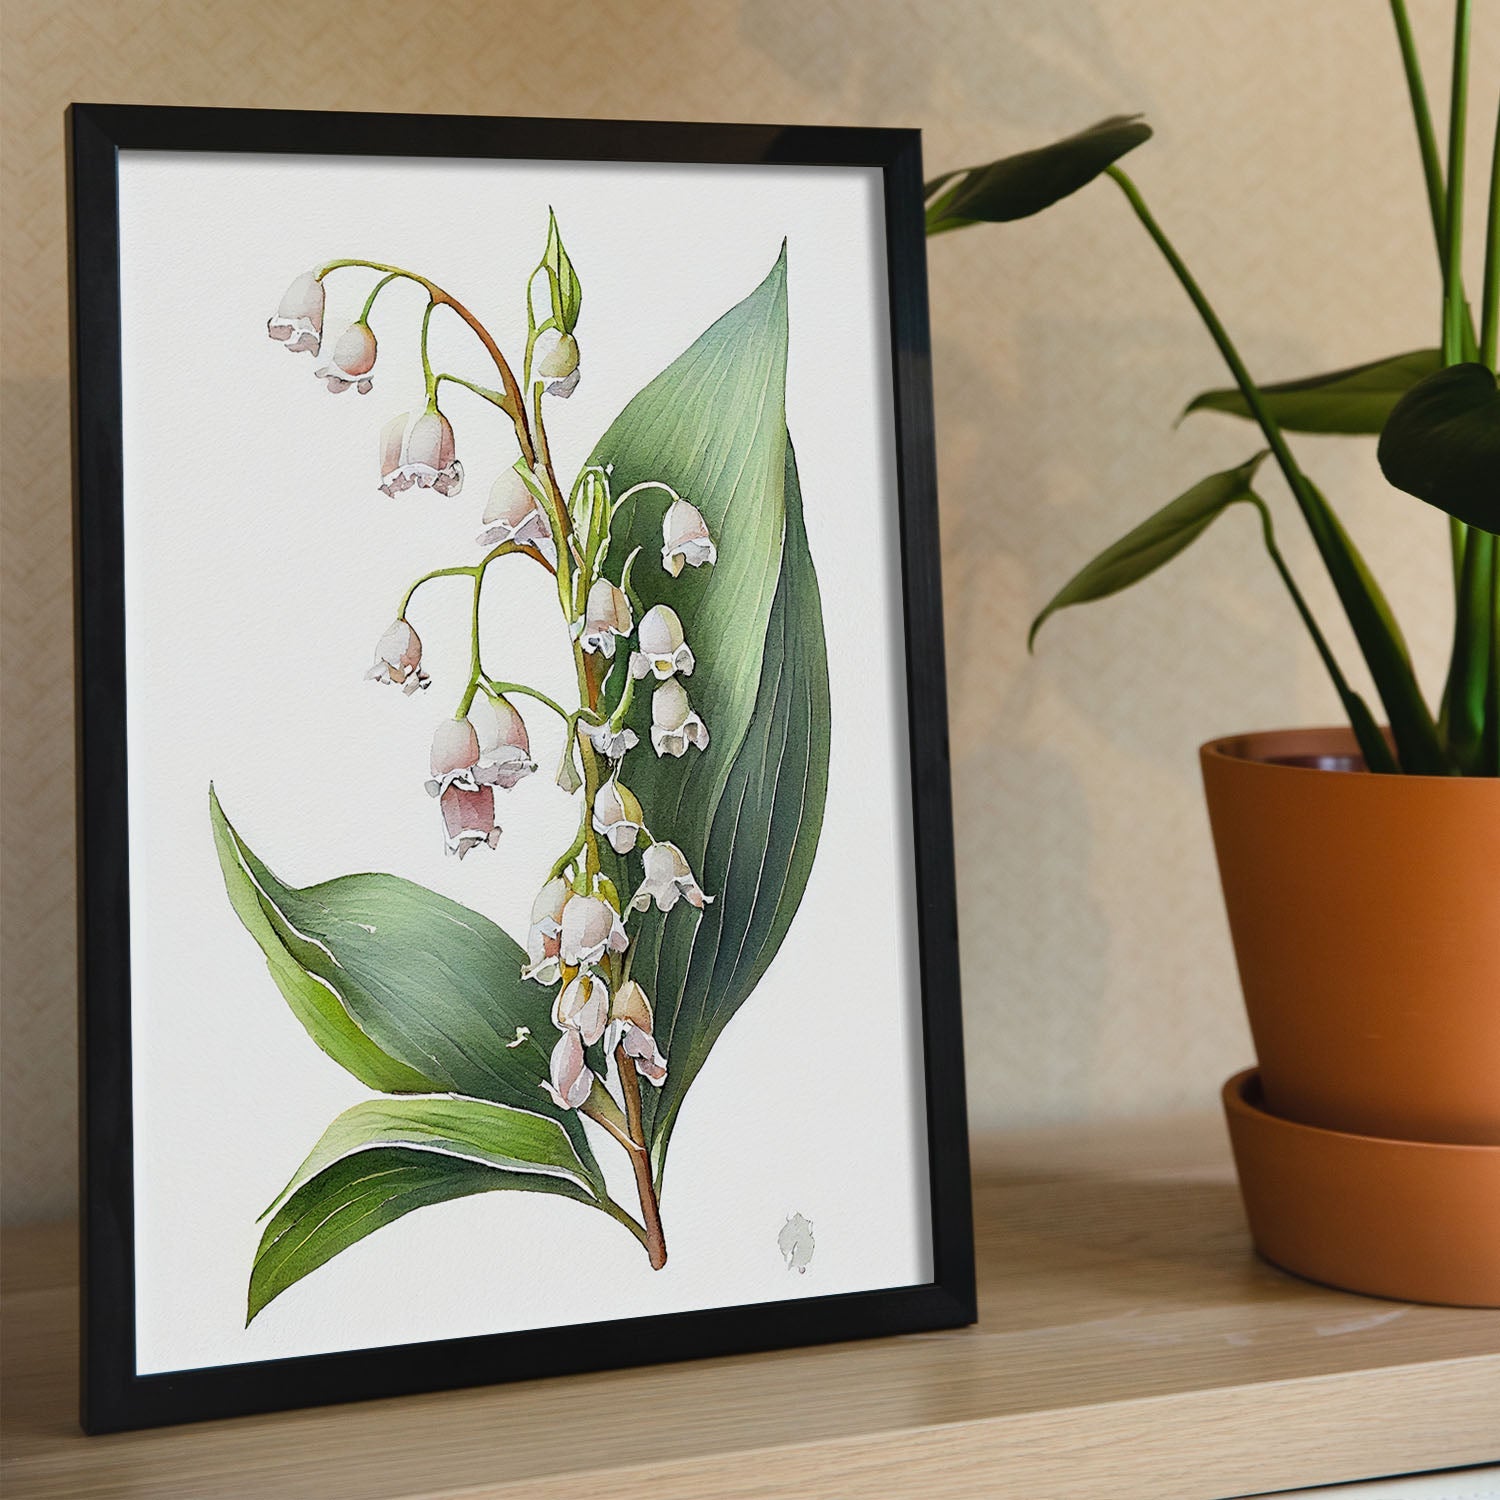 Nacnic watercolor minmal Lily of the Valley. Aesthetic Wall Art Prints for Bedroom or Living Room Design.-Artwork-Nacnic-A4-Sin Marco-Nacnic Estudio SL